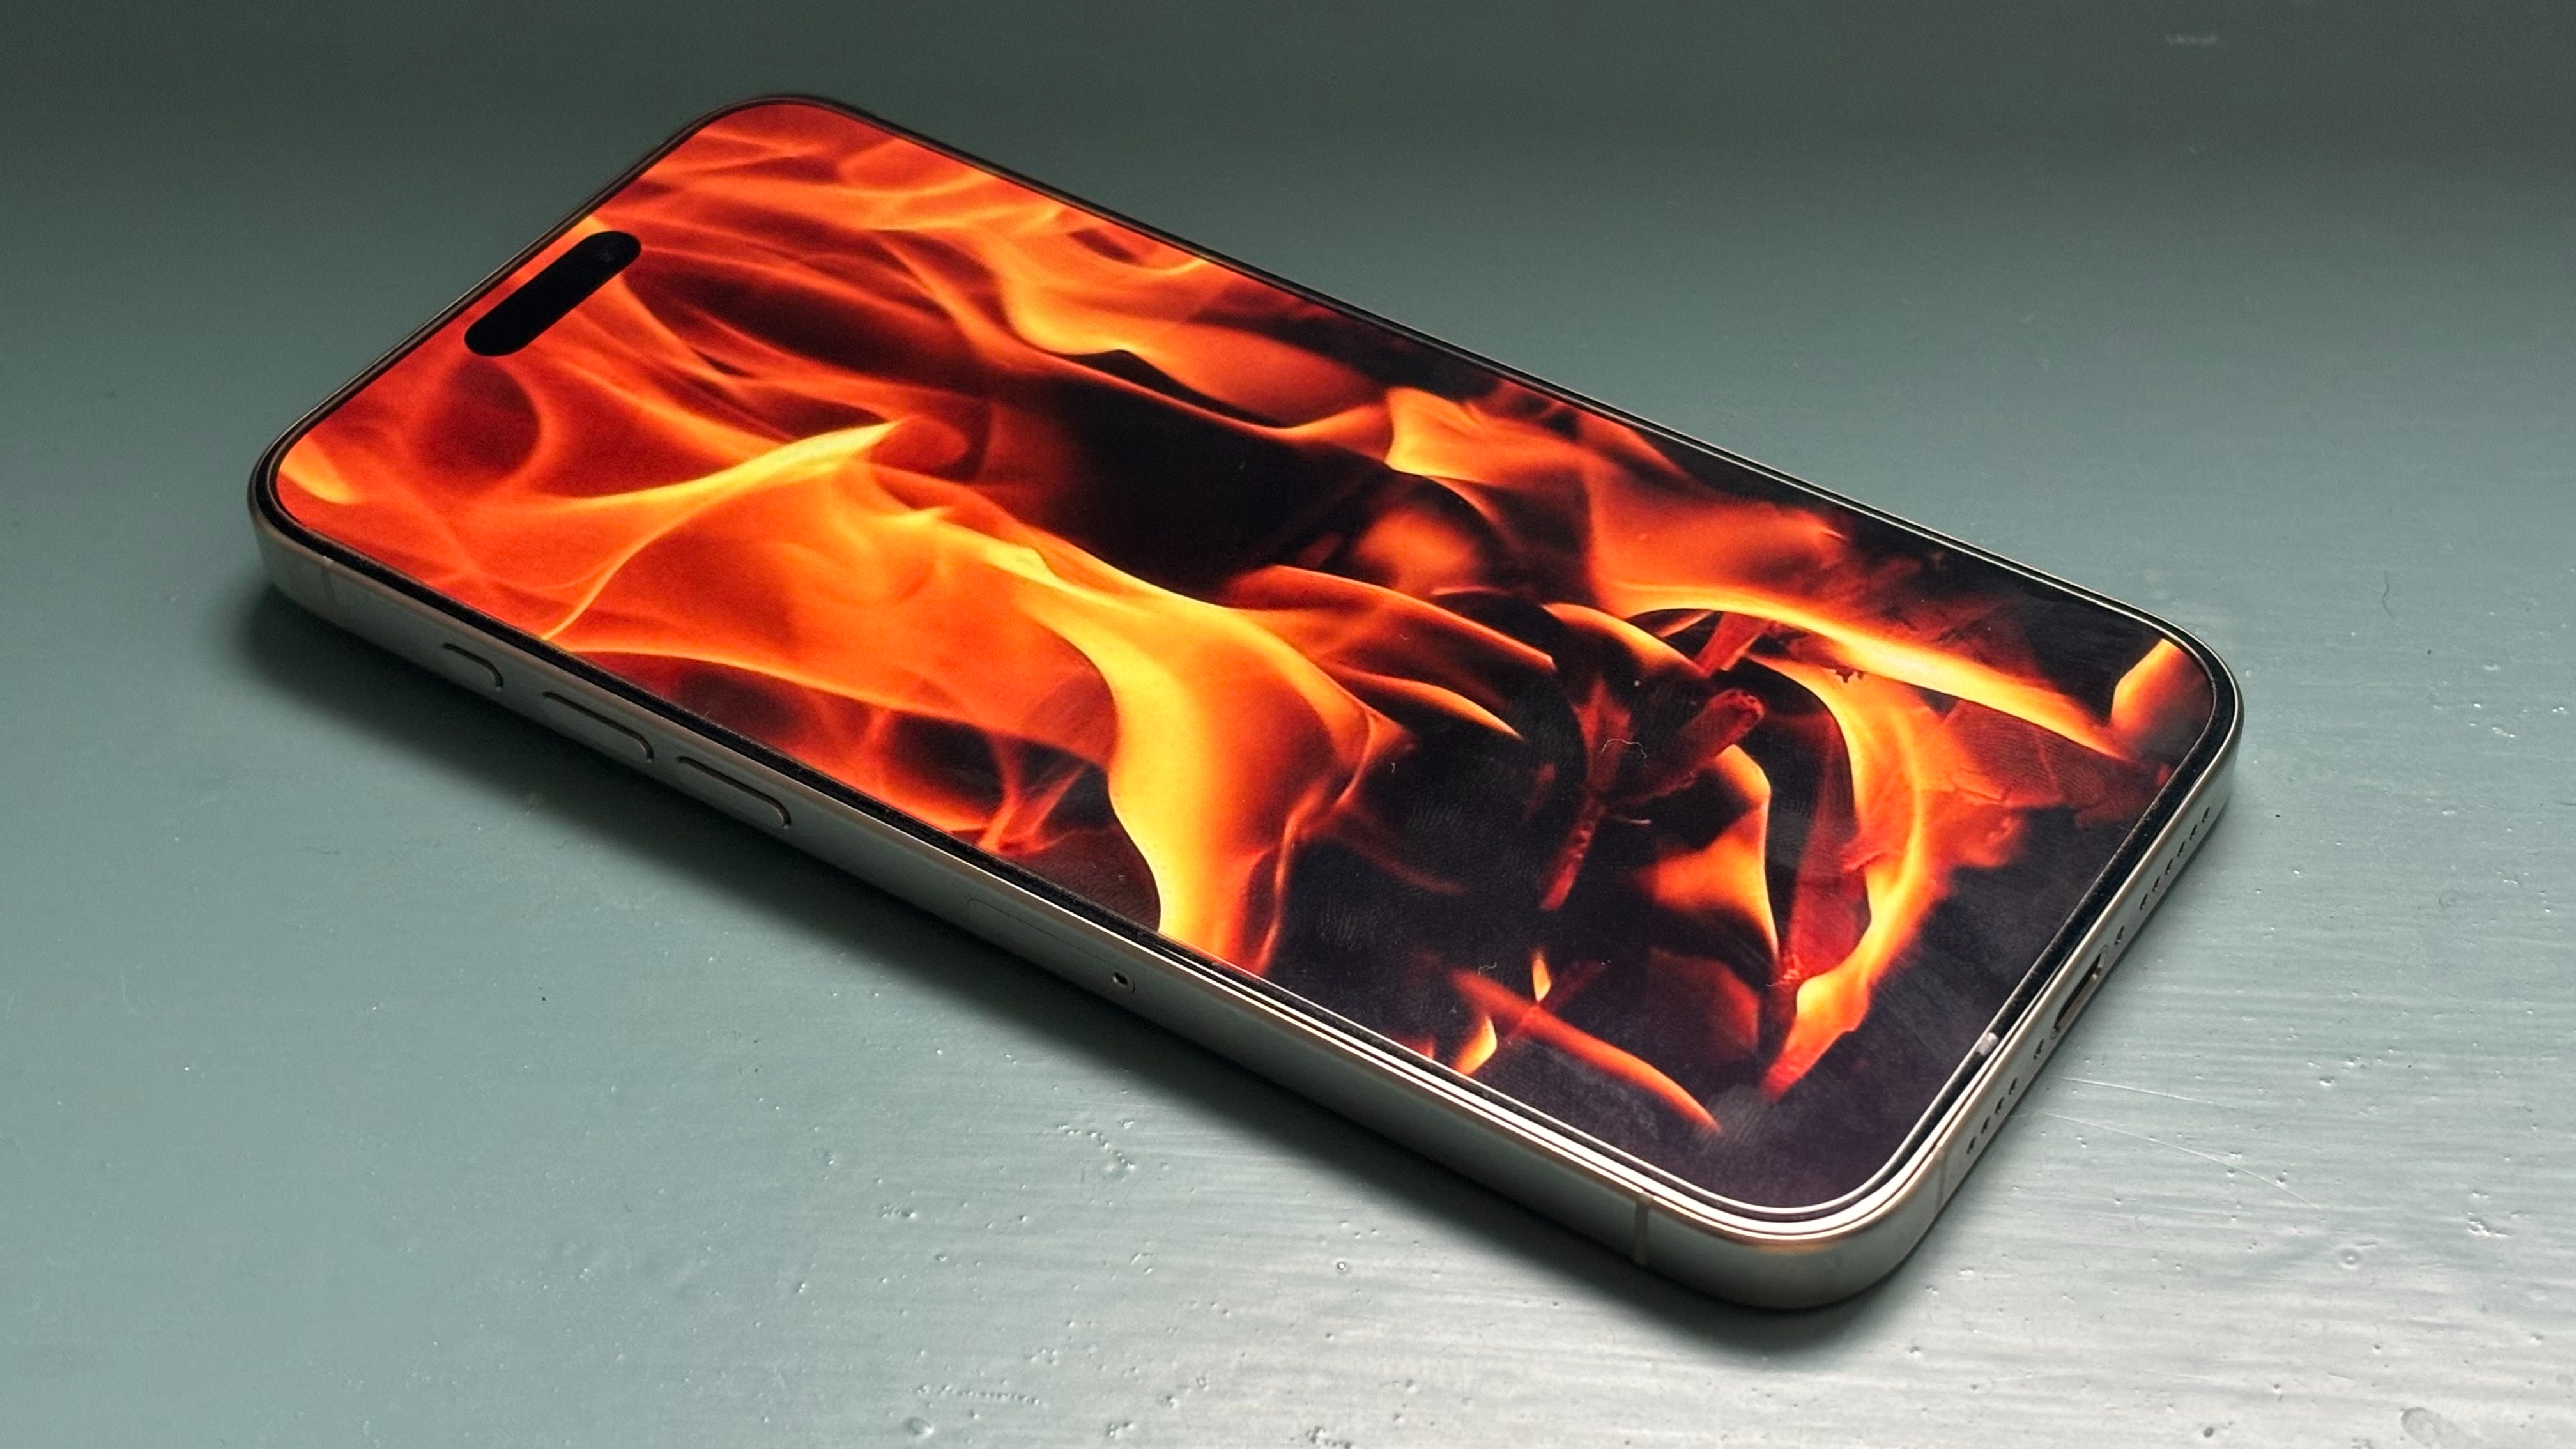 Can A Patch FIX the iPhone 15 getting HOTTER when its at its LIMIT? Or is it  Hardware Related 